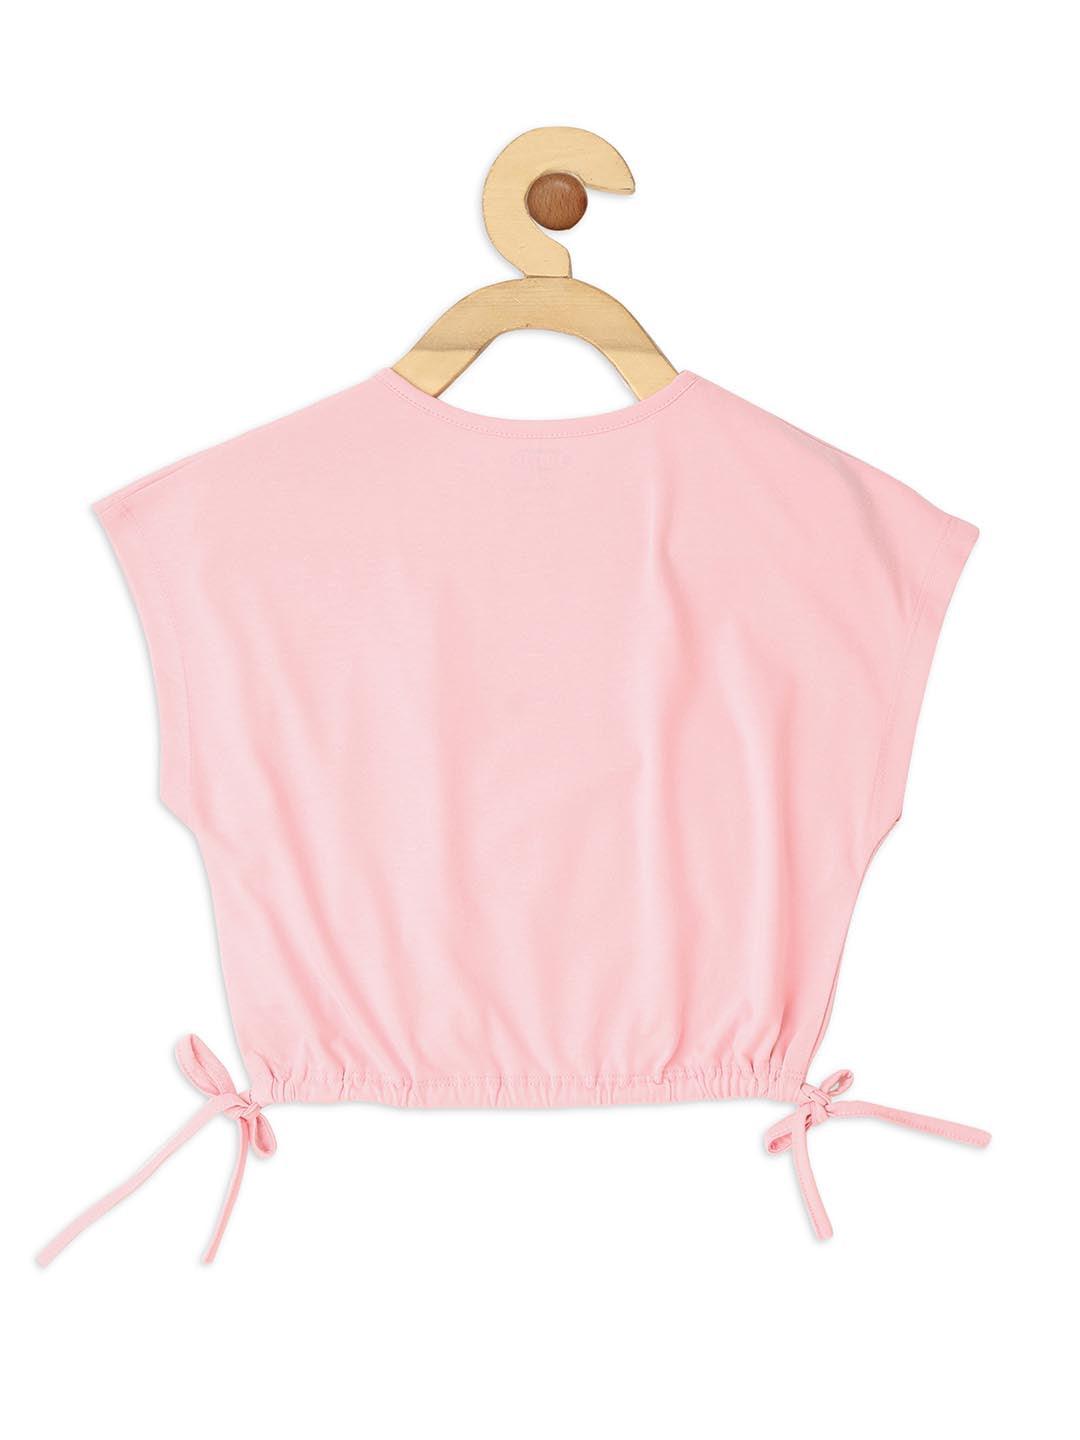 Orchid Pink Top for Girls - Lagorii Kids